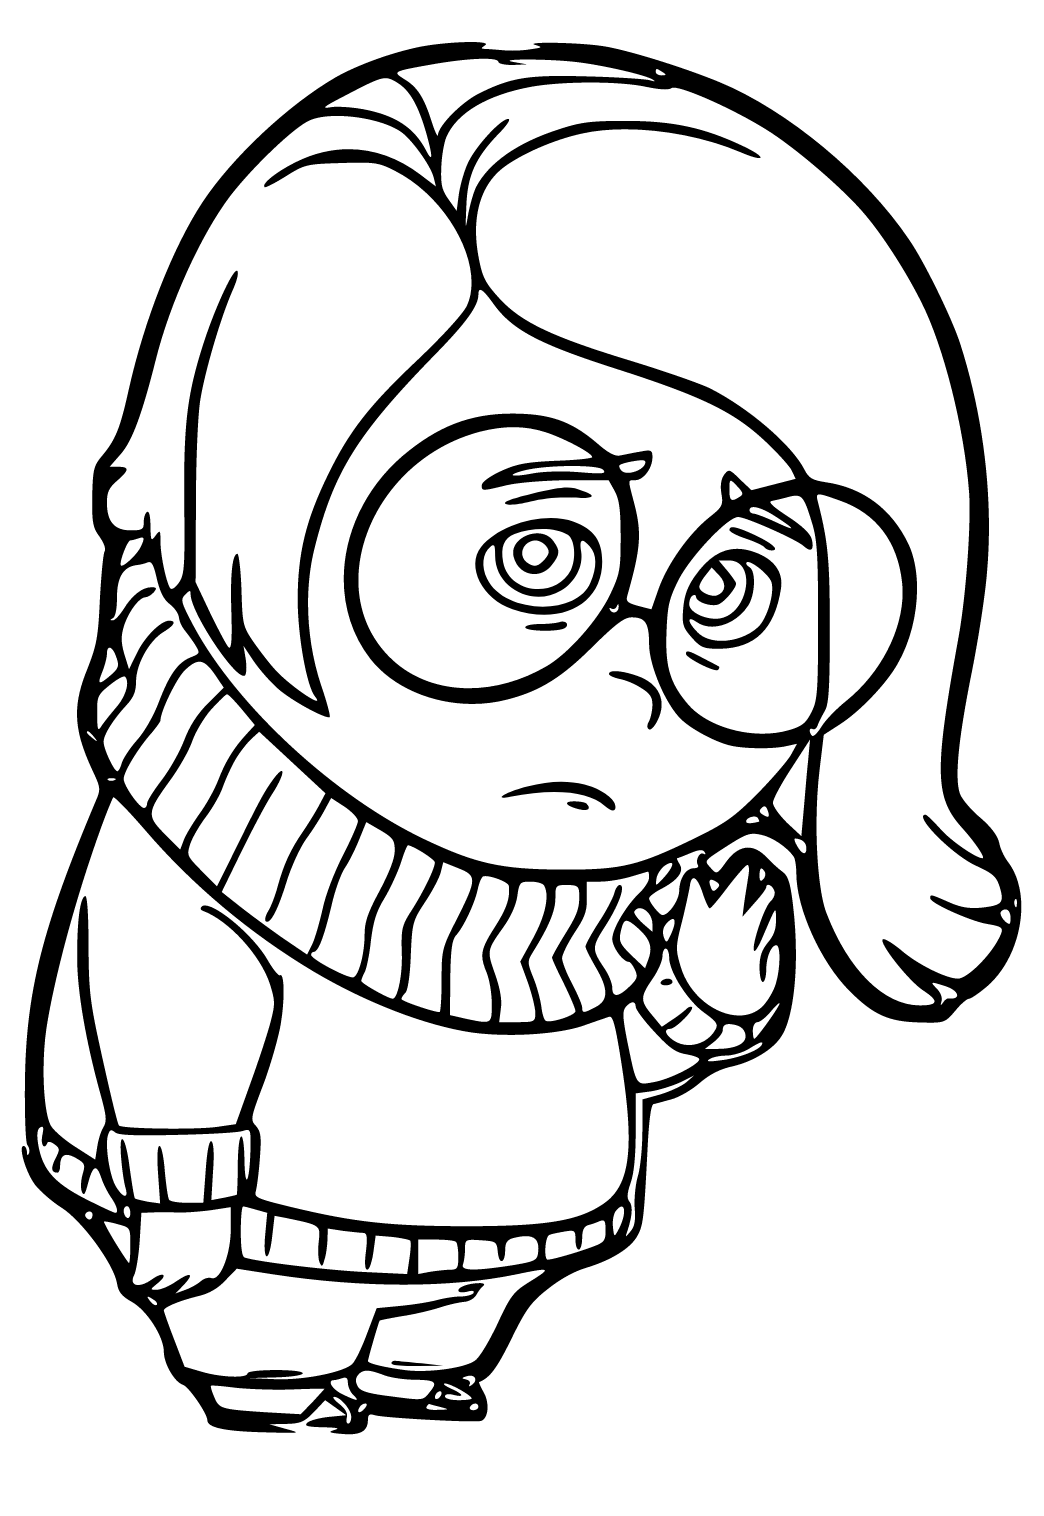 Free printable sad character coloring page for adults and kids